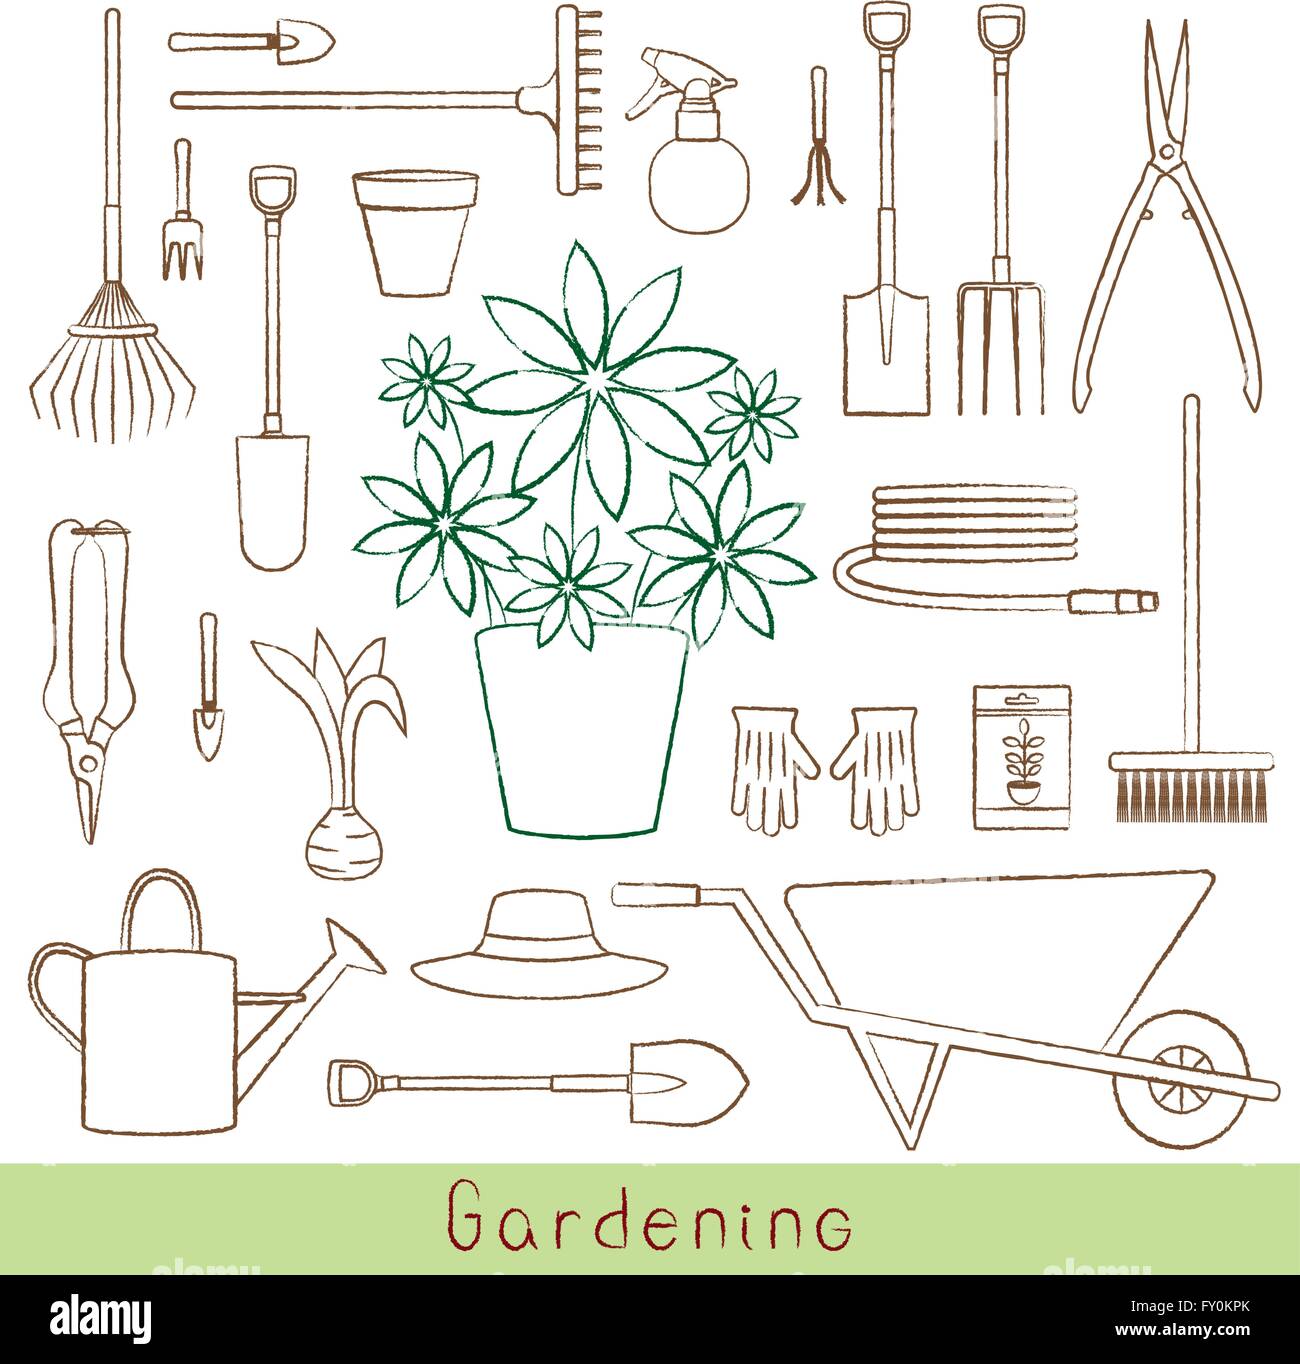 Hand drawn gardening related objects Stock Vector